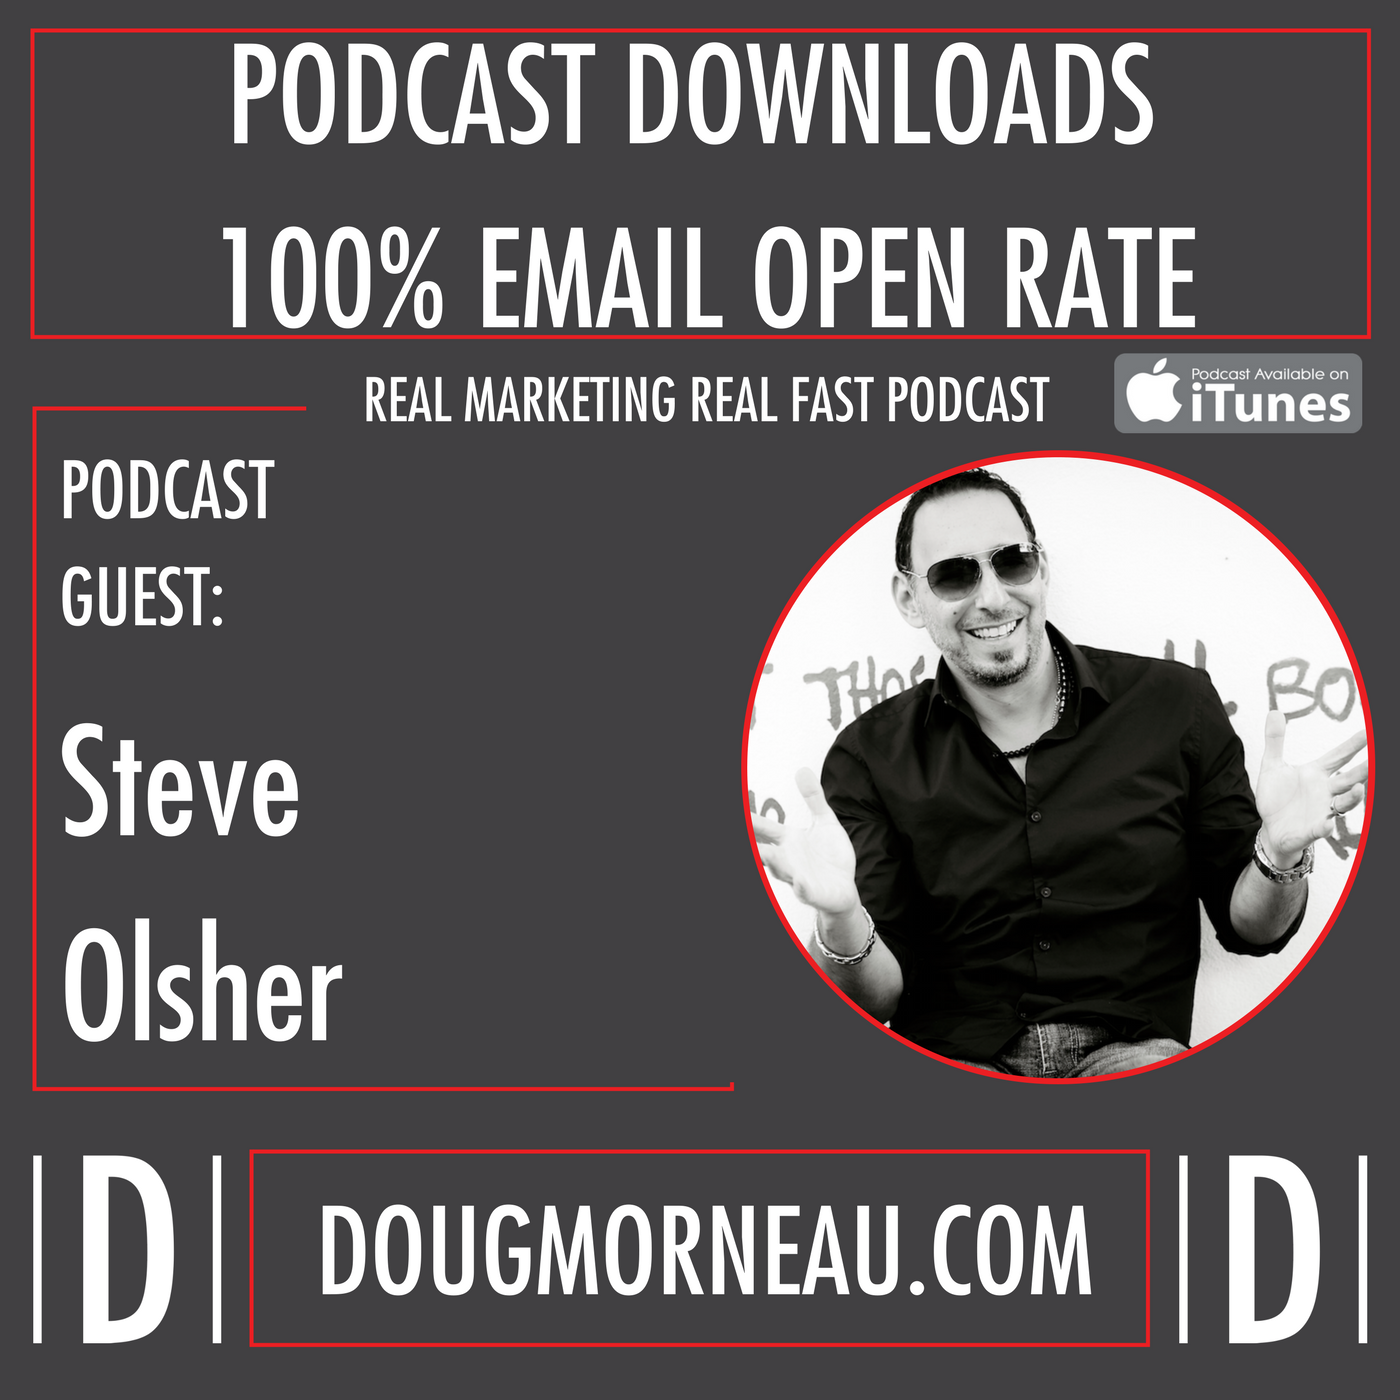 PODCAST DOWNLOADS = 100% EMAIL OPEN RATE - DOUG MORNEAU - STEVE OLSHER - REAL MARKETING REAL FAST PODCAST